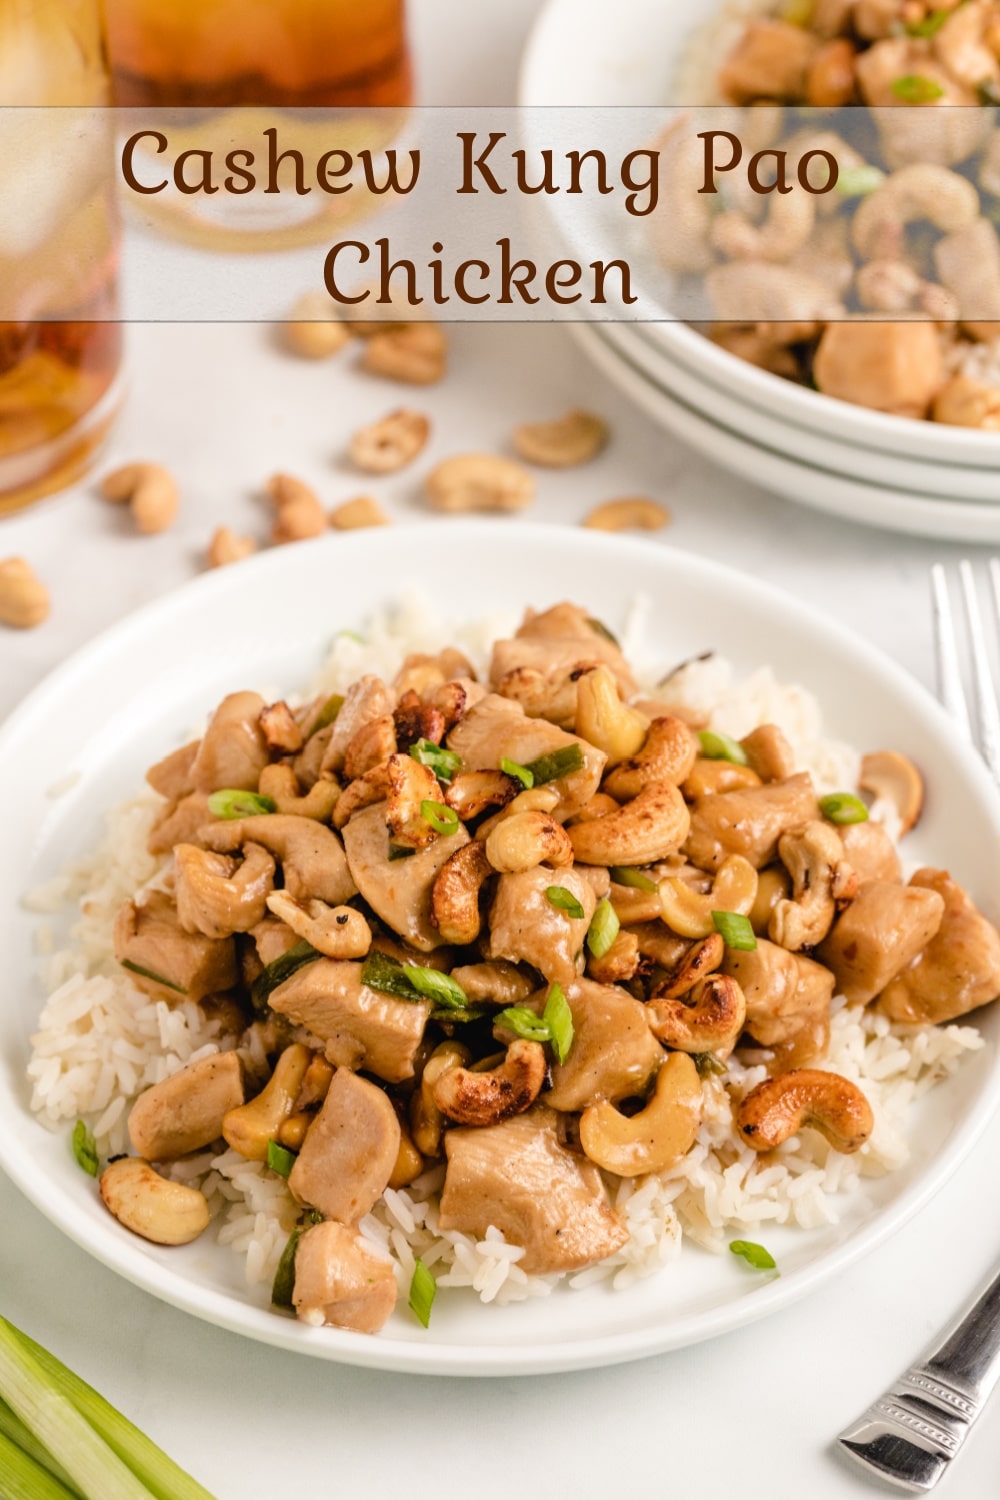 Kung Pao Chicken with tender chunks of chicken, crunchy cashews, and a spicy sauce, tastes better than takeout and is easy to make at home. This easy weeknight dinner recipe is a classic when it comes to Chinese takeout and is one of the best comfort food dinners. via @cmpollak1